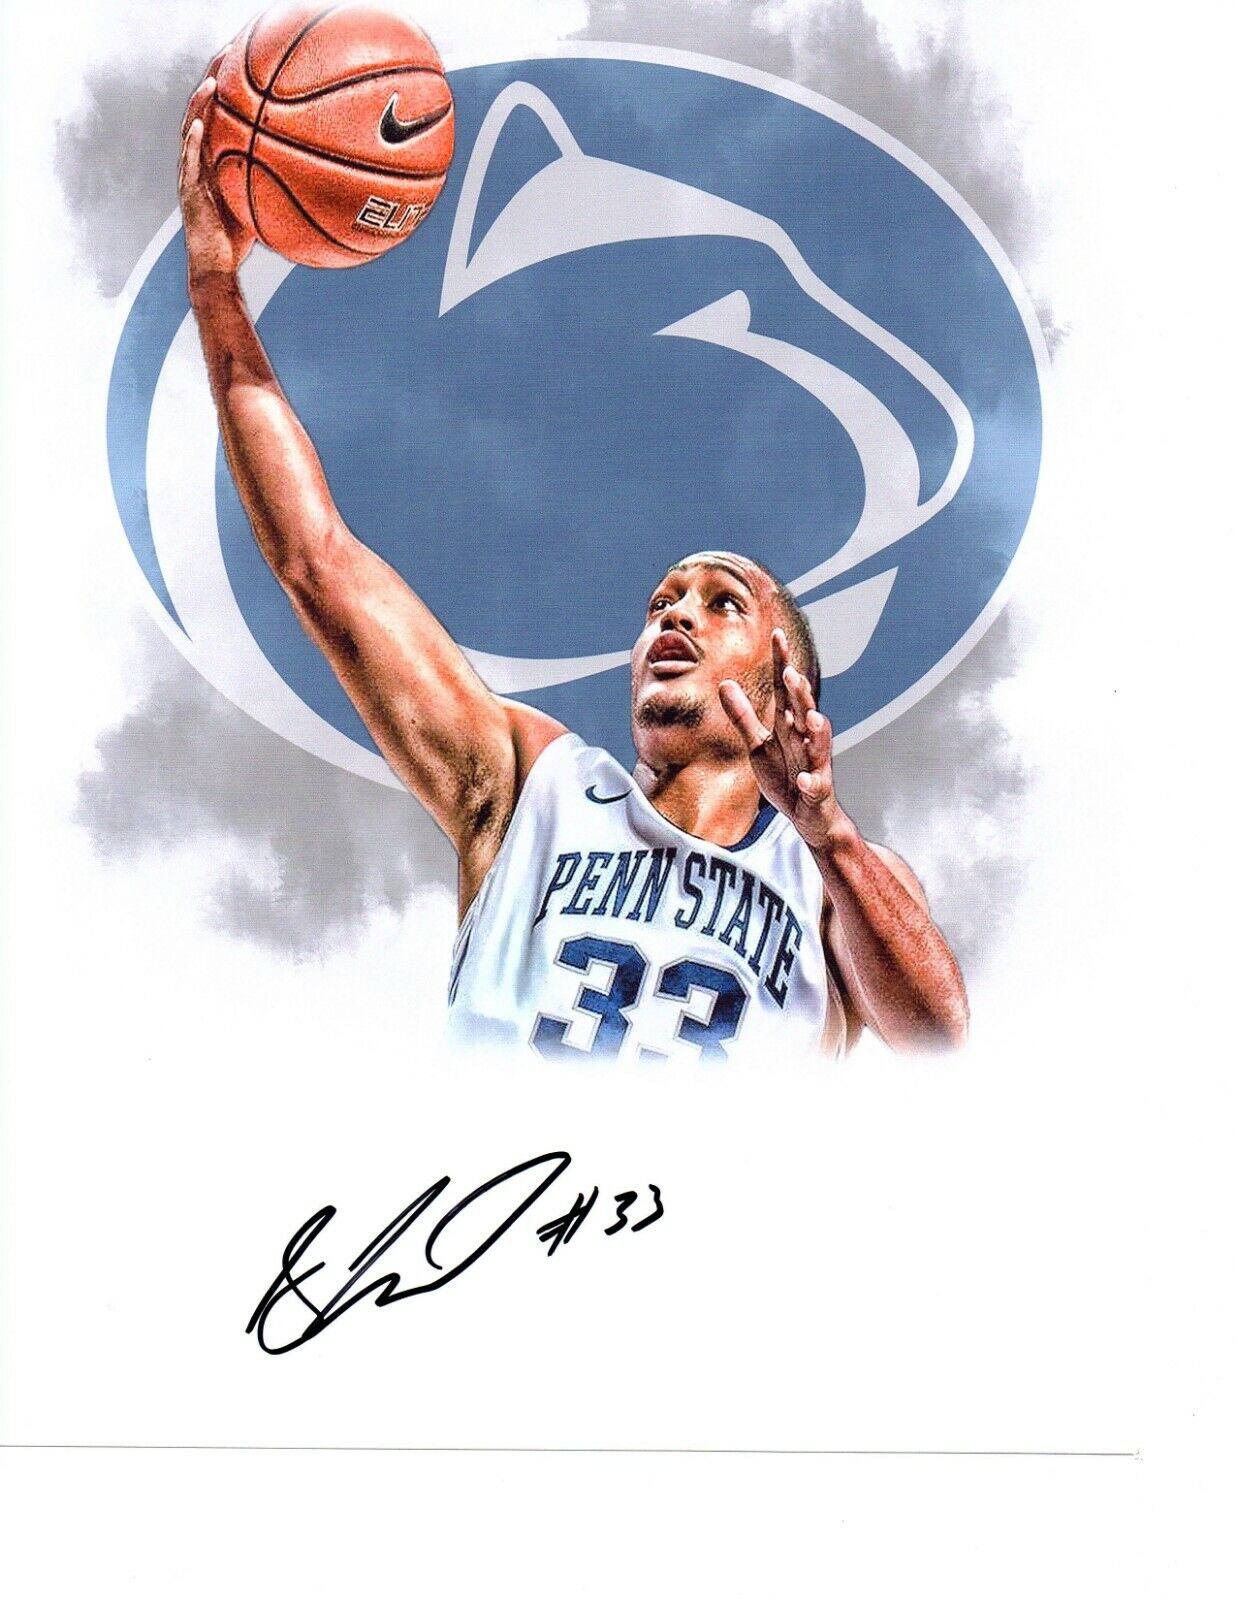 Shep Garner Penn State Nittany Lions basketball Signed Photo Poster painting 8x10 Autograph PSU*